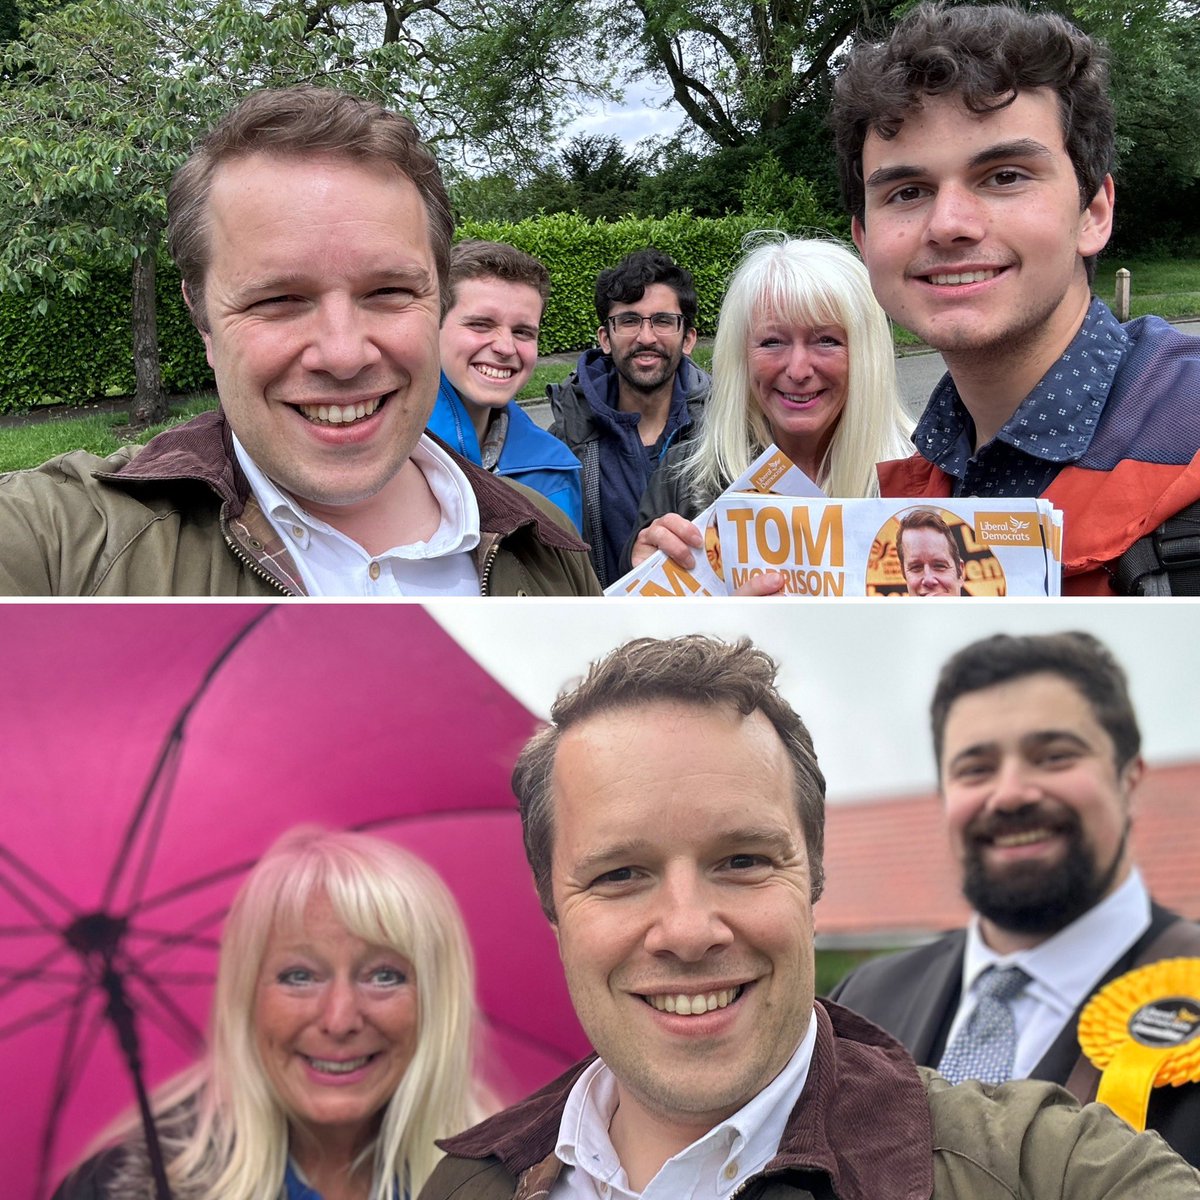 A brilliant day talking to people in Cheadle Hulme and Woodford yesterday! The campaign to beat the Conservatives in Cheadle is growing. If you’d like to help get change in Cheadle, sign up here! cheadle-libdems.org.uk/volunteer